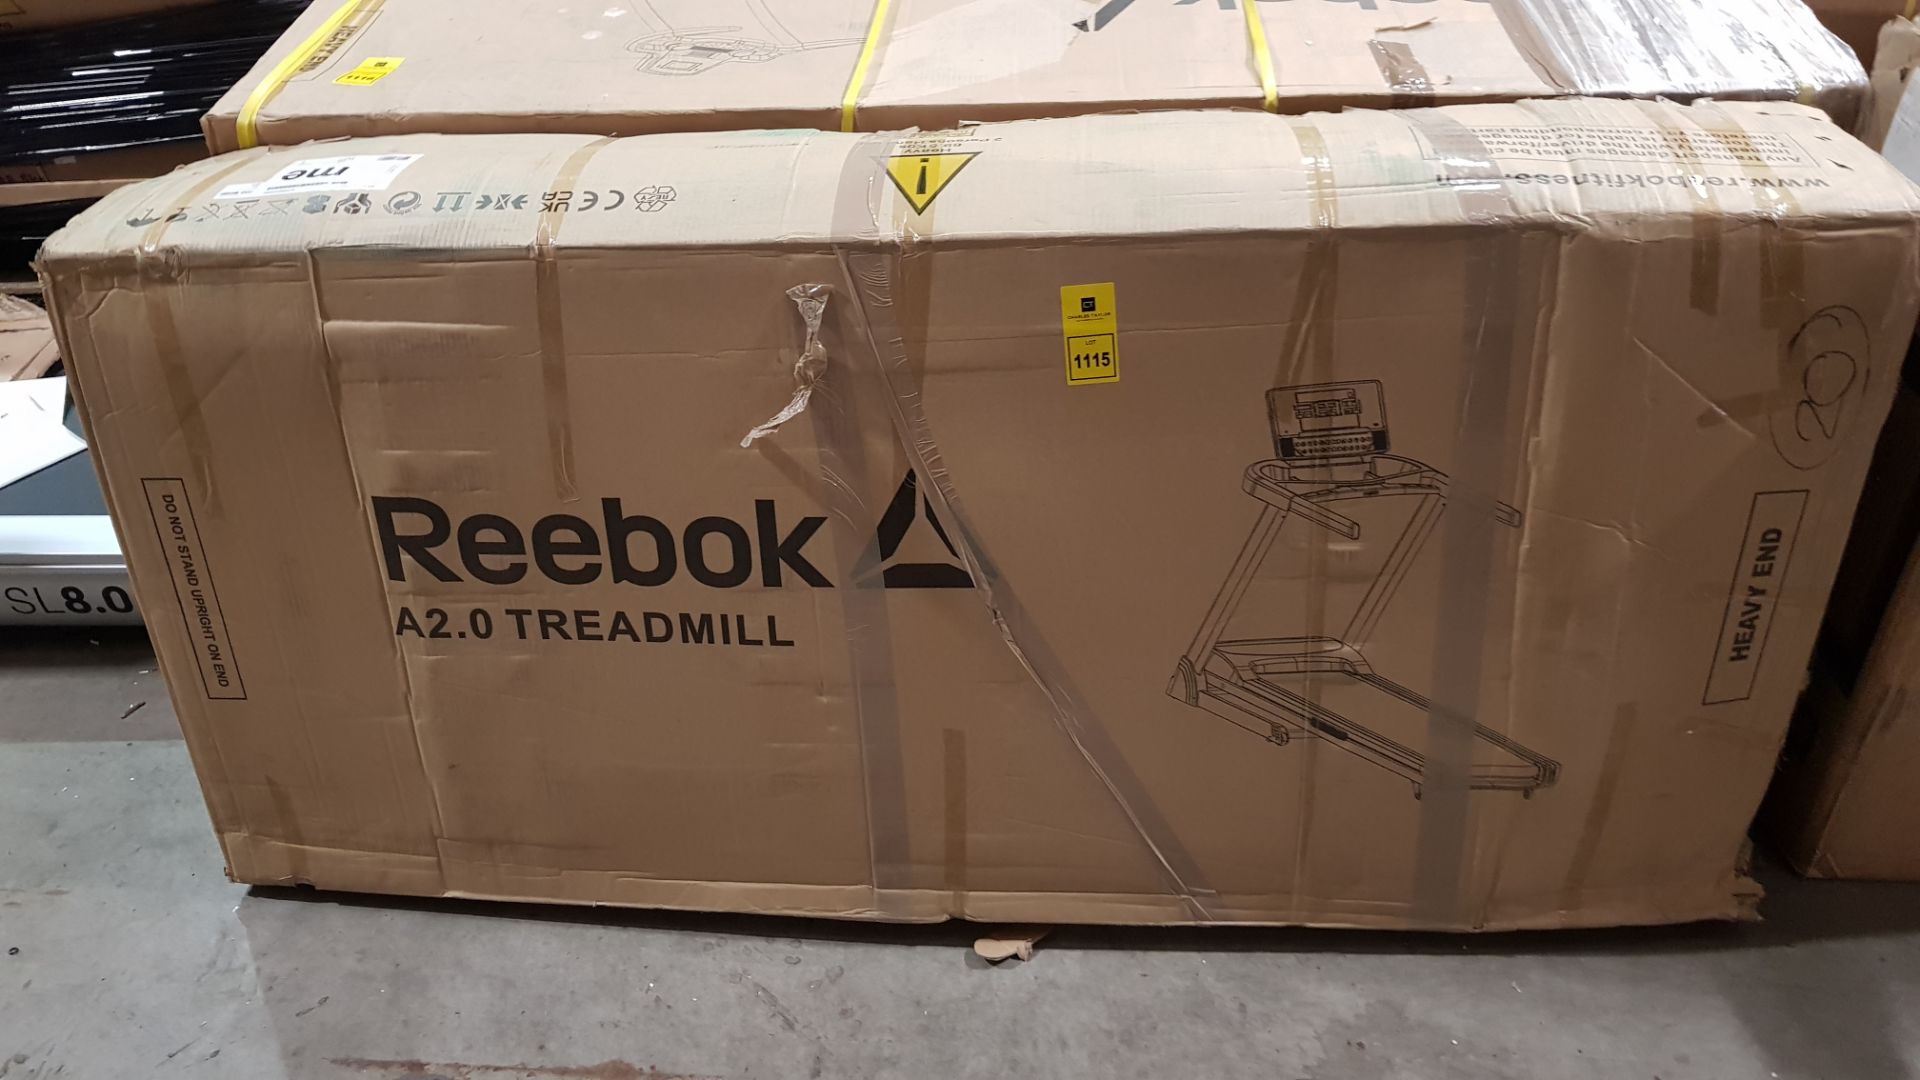 1 X BOXED REEBOK A2.0 TREADMILL IN SILVER - IN 1 BOX ( PLEASE NOTE CUSTOMER RETURN AND DAMAGE ON BOX - Image 2 of 2